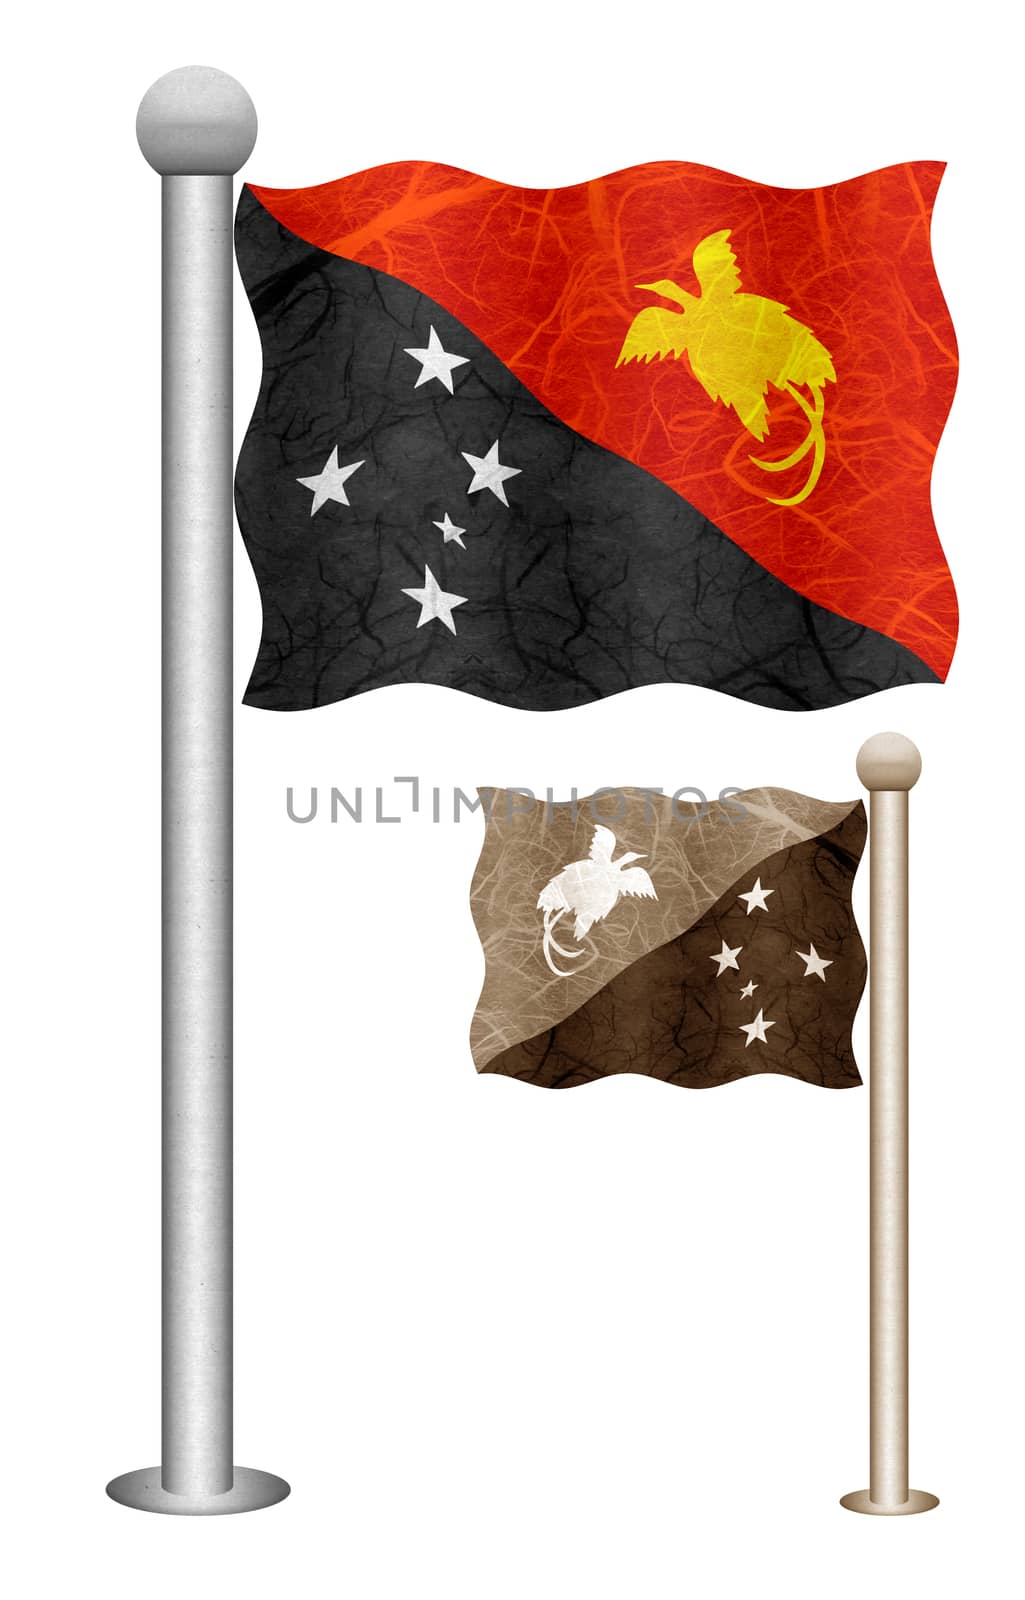 Papua New Guinea flag waving on the wind. Flags of countries in Oceania. Mulberry paper on white background.